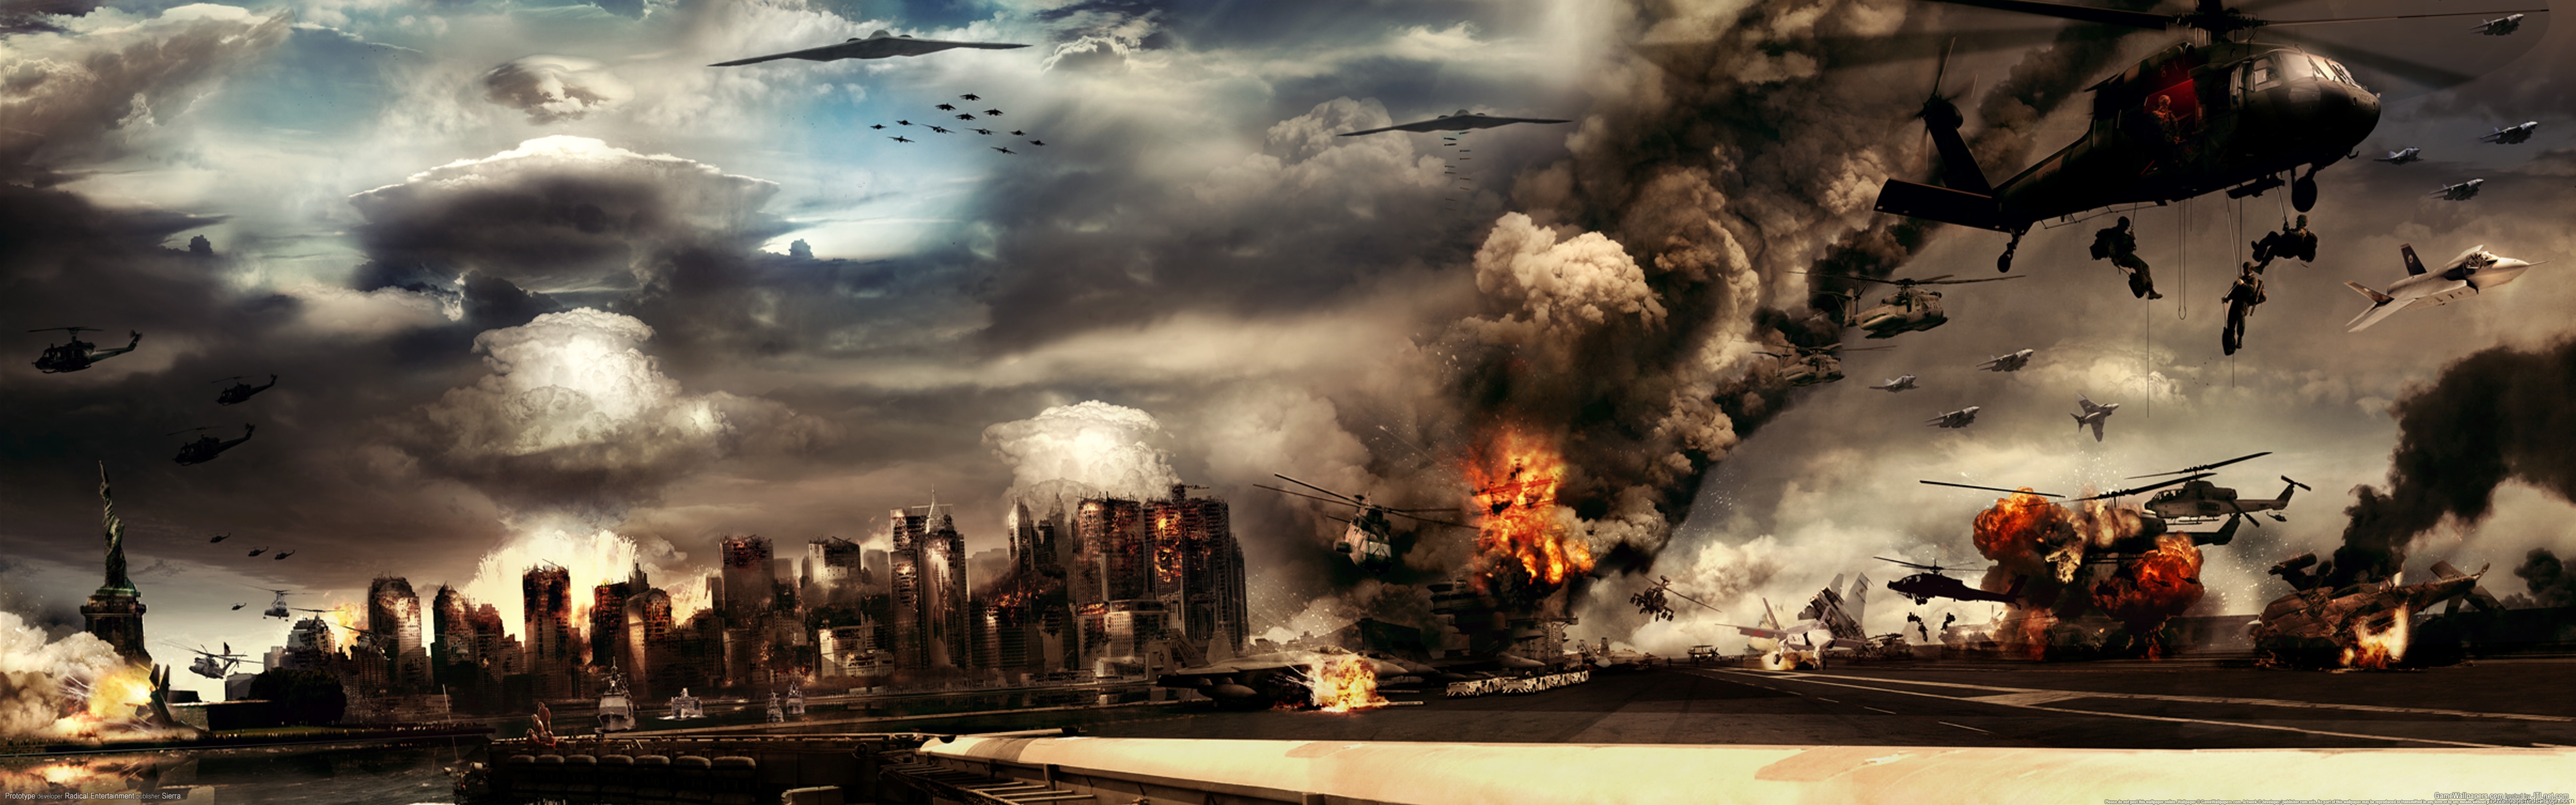 wallpaper 3360x1050,explosion,strategy video game,sky,smoke,pollution